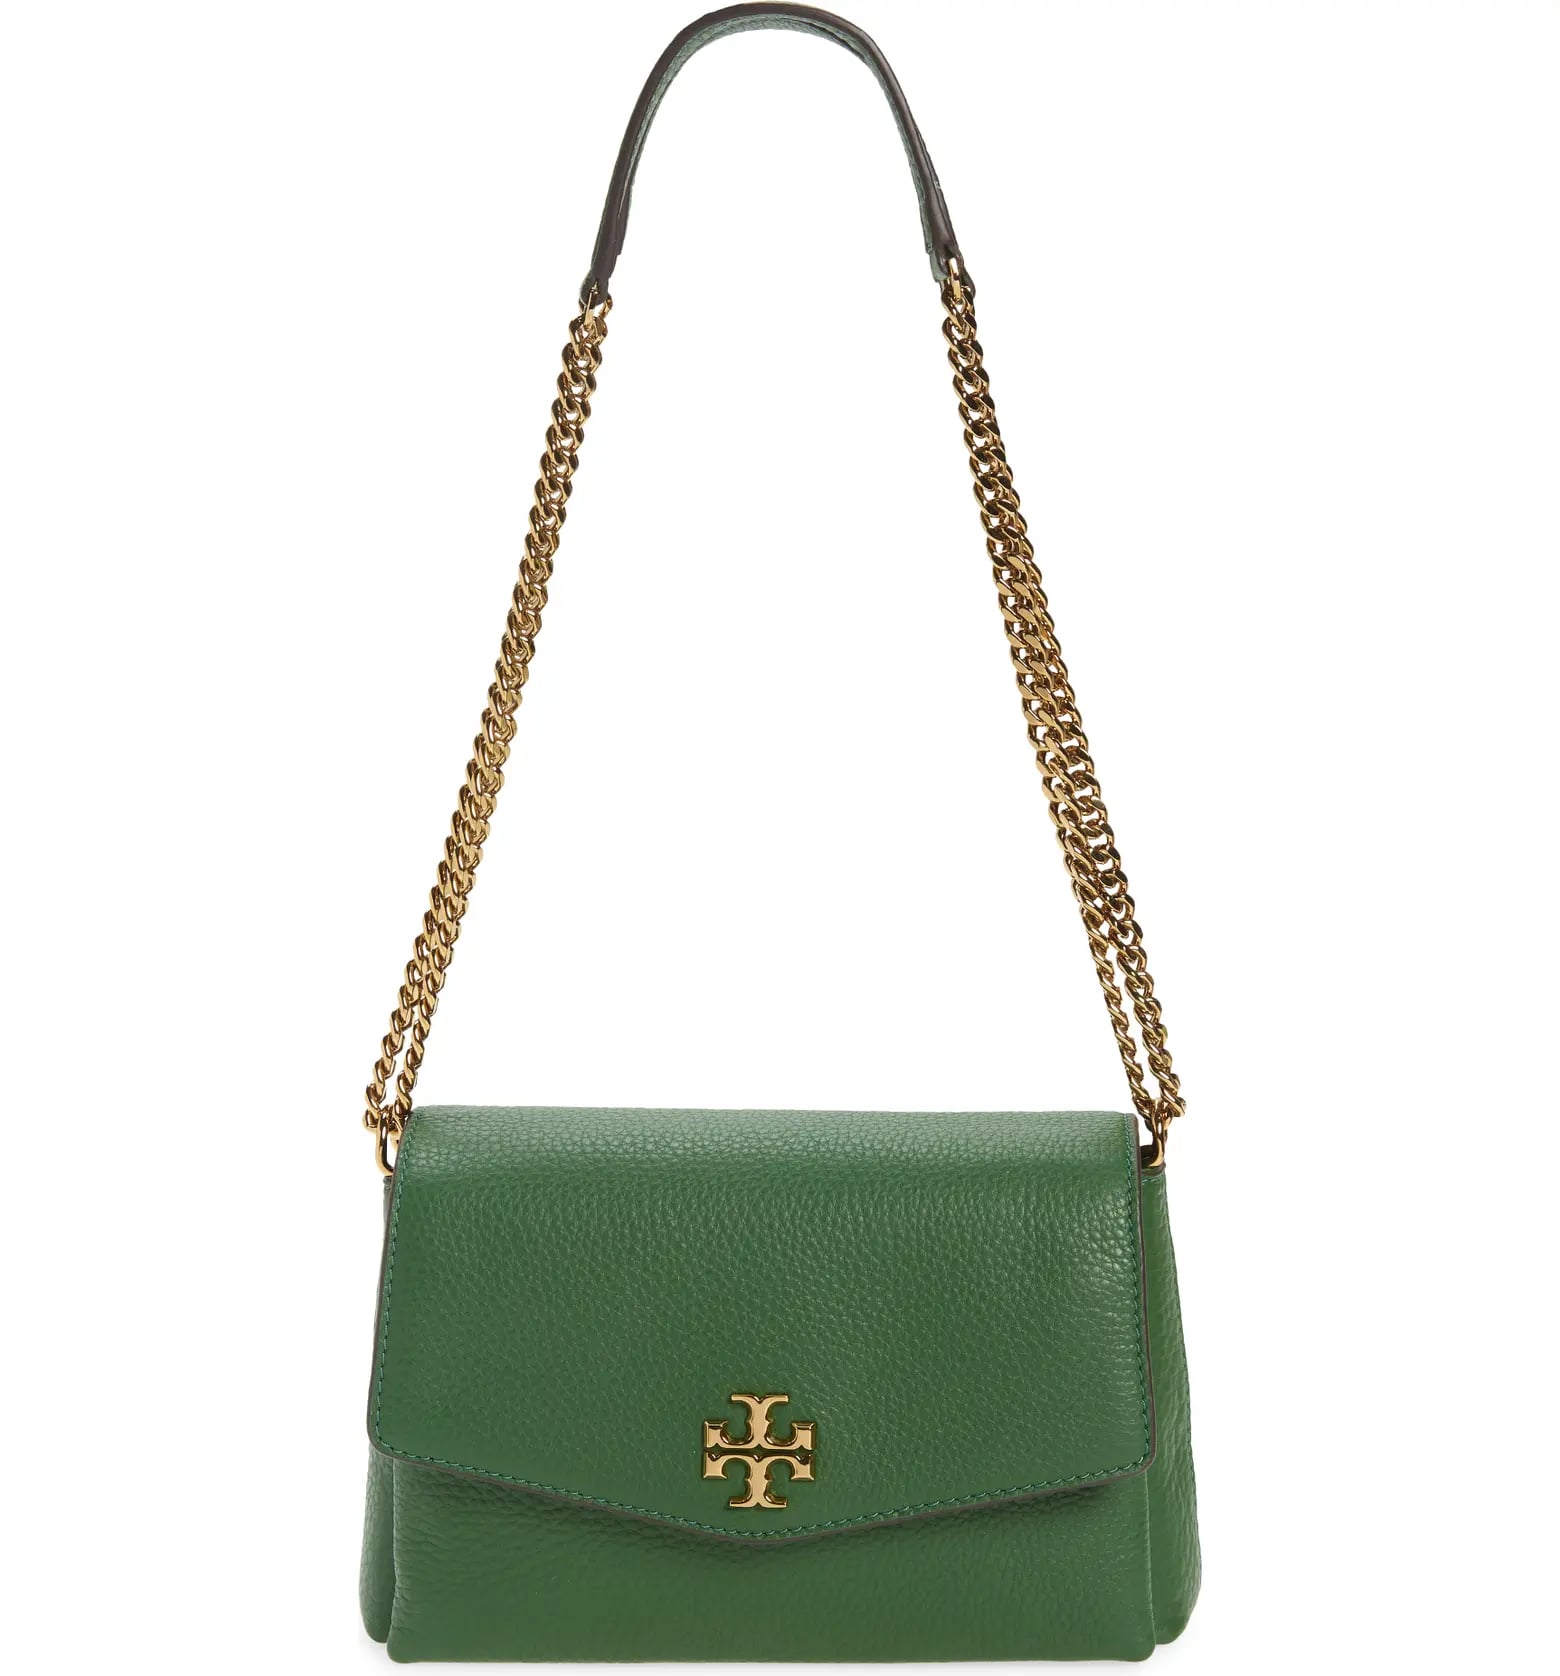 Green With Envy: Tory Burch Small Kira Leather Convertible Crossbody Bag |  21 Deals to Score From Nordstrom's Spring Sale | POPSUGAR Fashion Photo 5